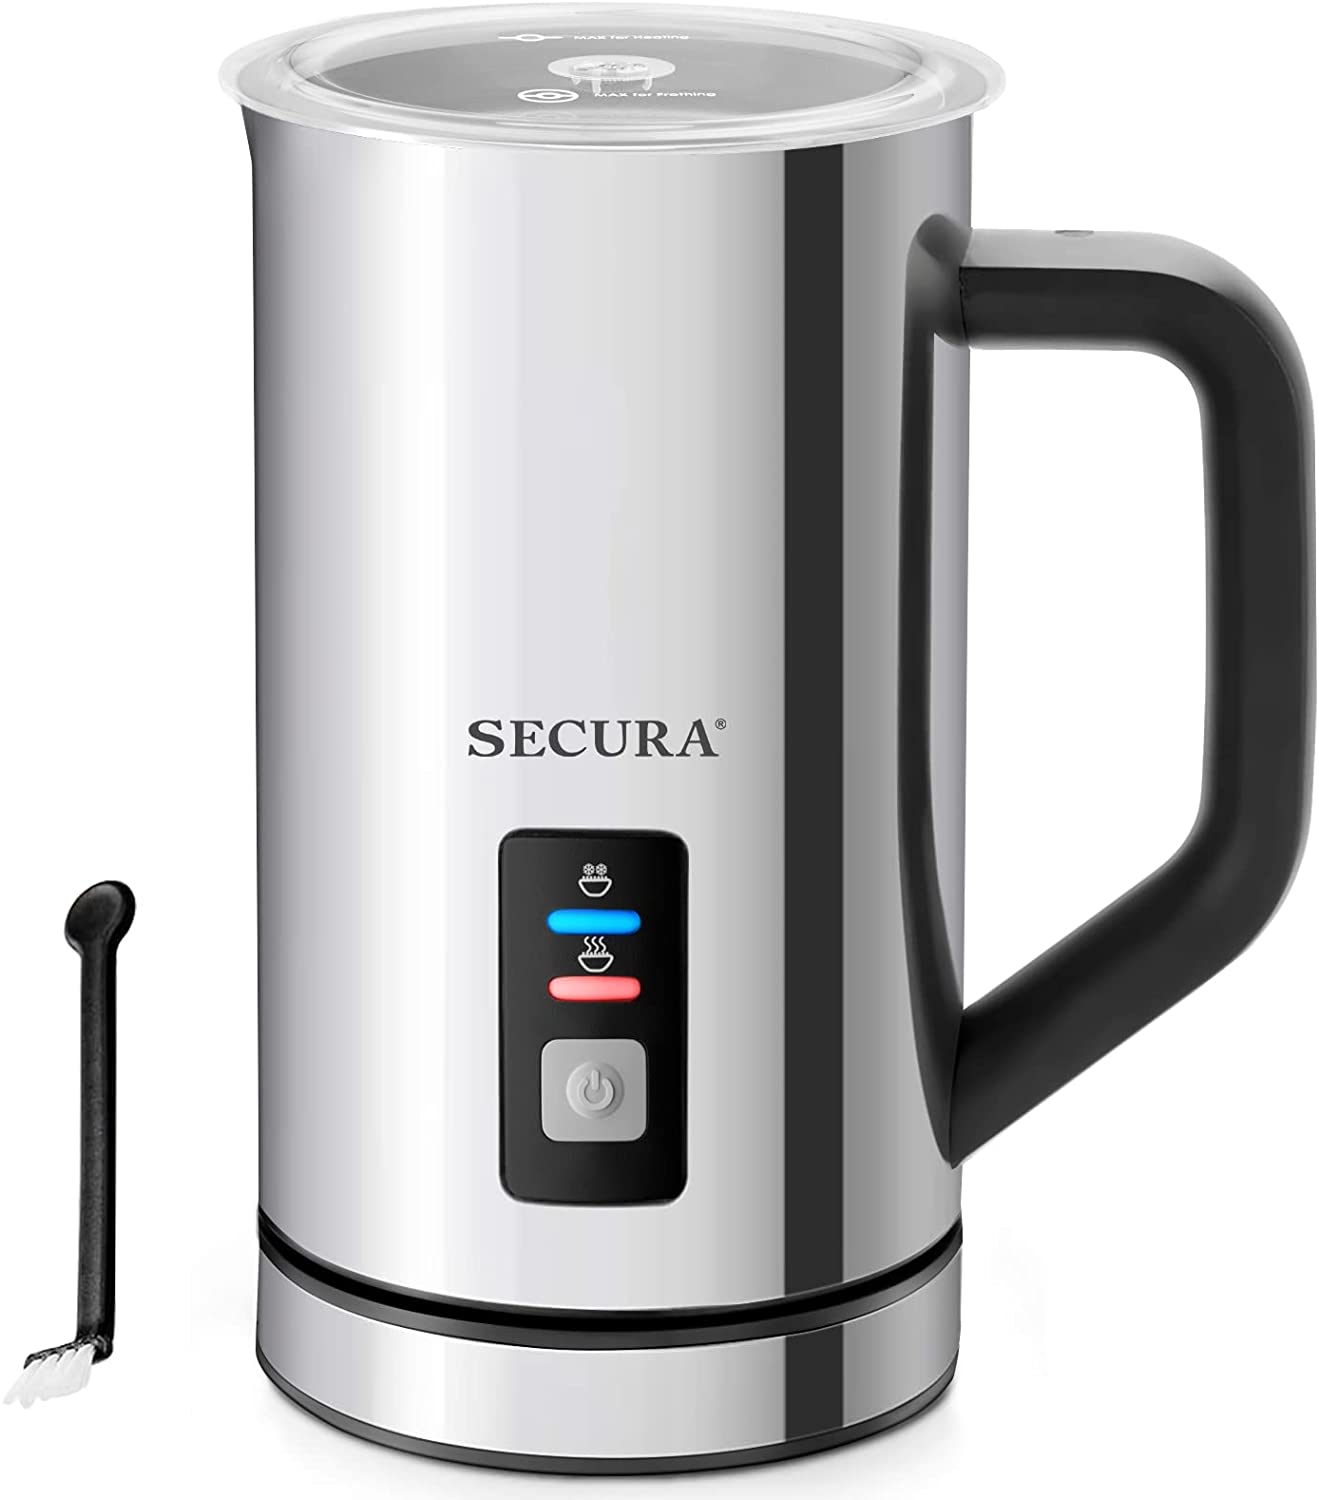 Bodum Bistro Electric Milk Frother Barista(11901-913) Review